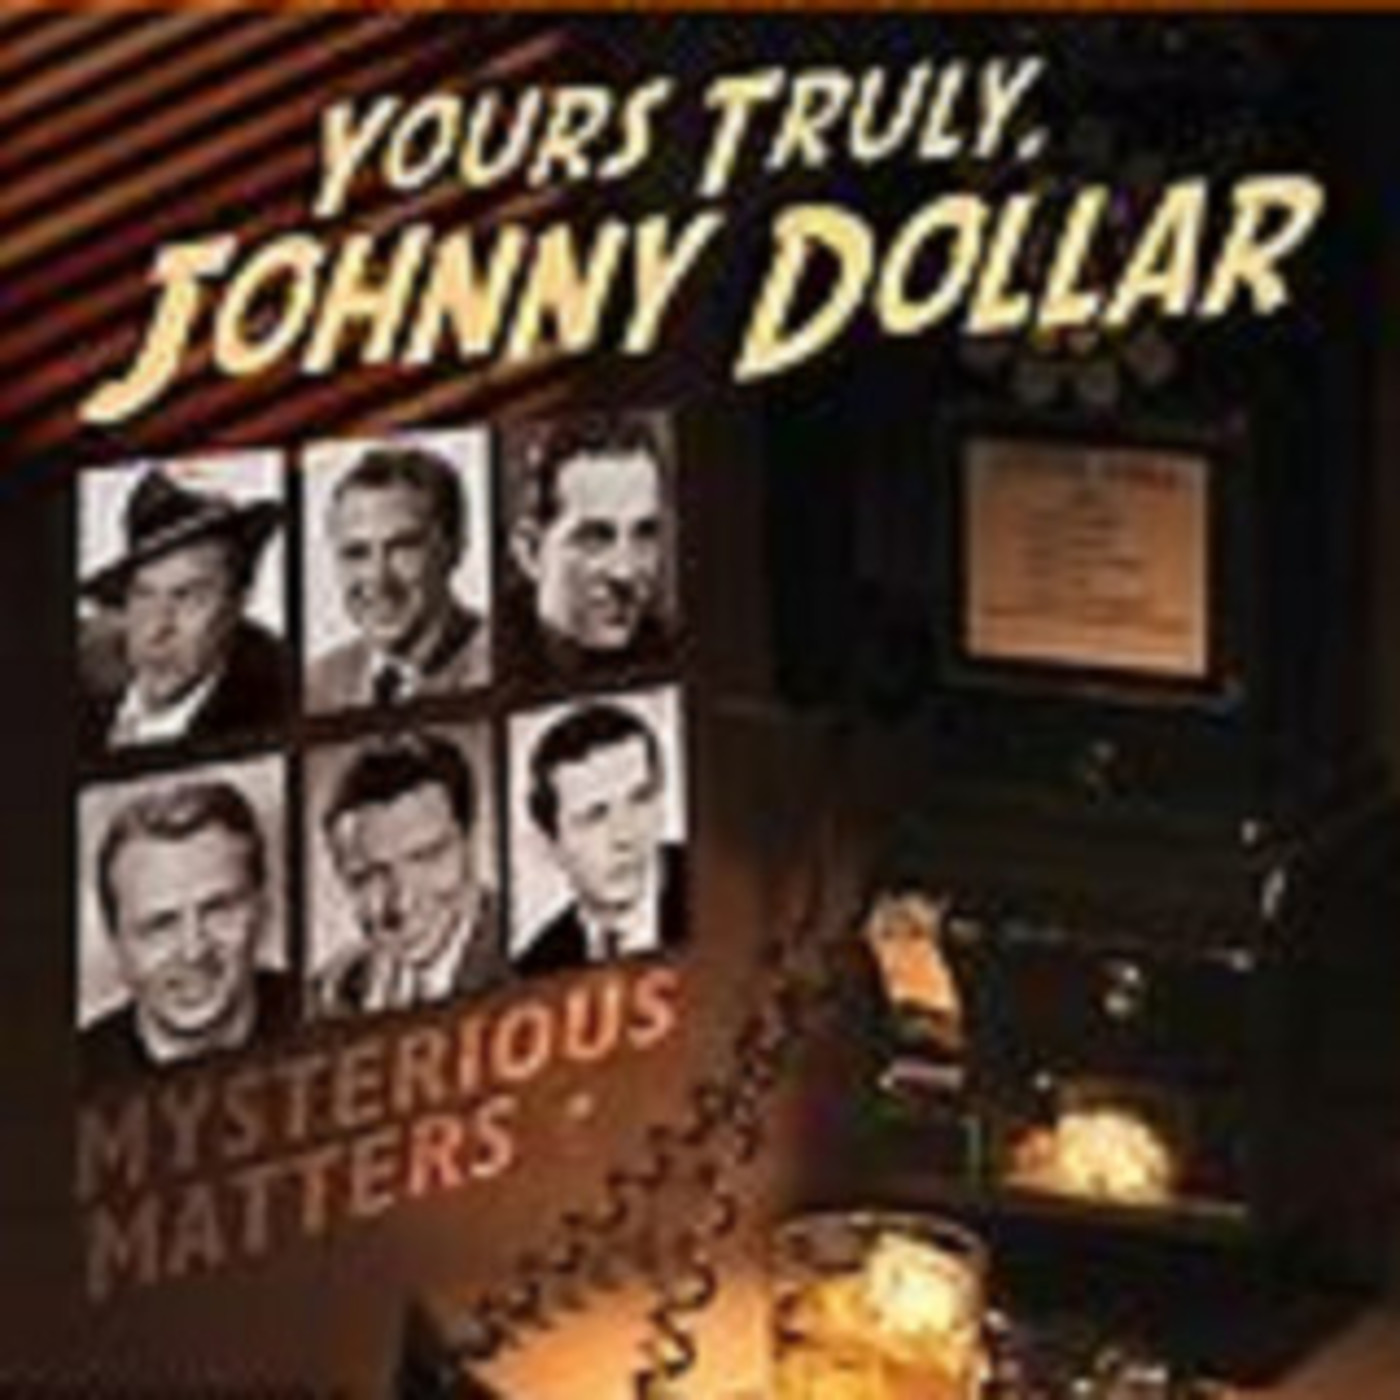 Yours Truly, Johnny Dollar - 040862, episode 786 - The Ivy Emerald Matter